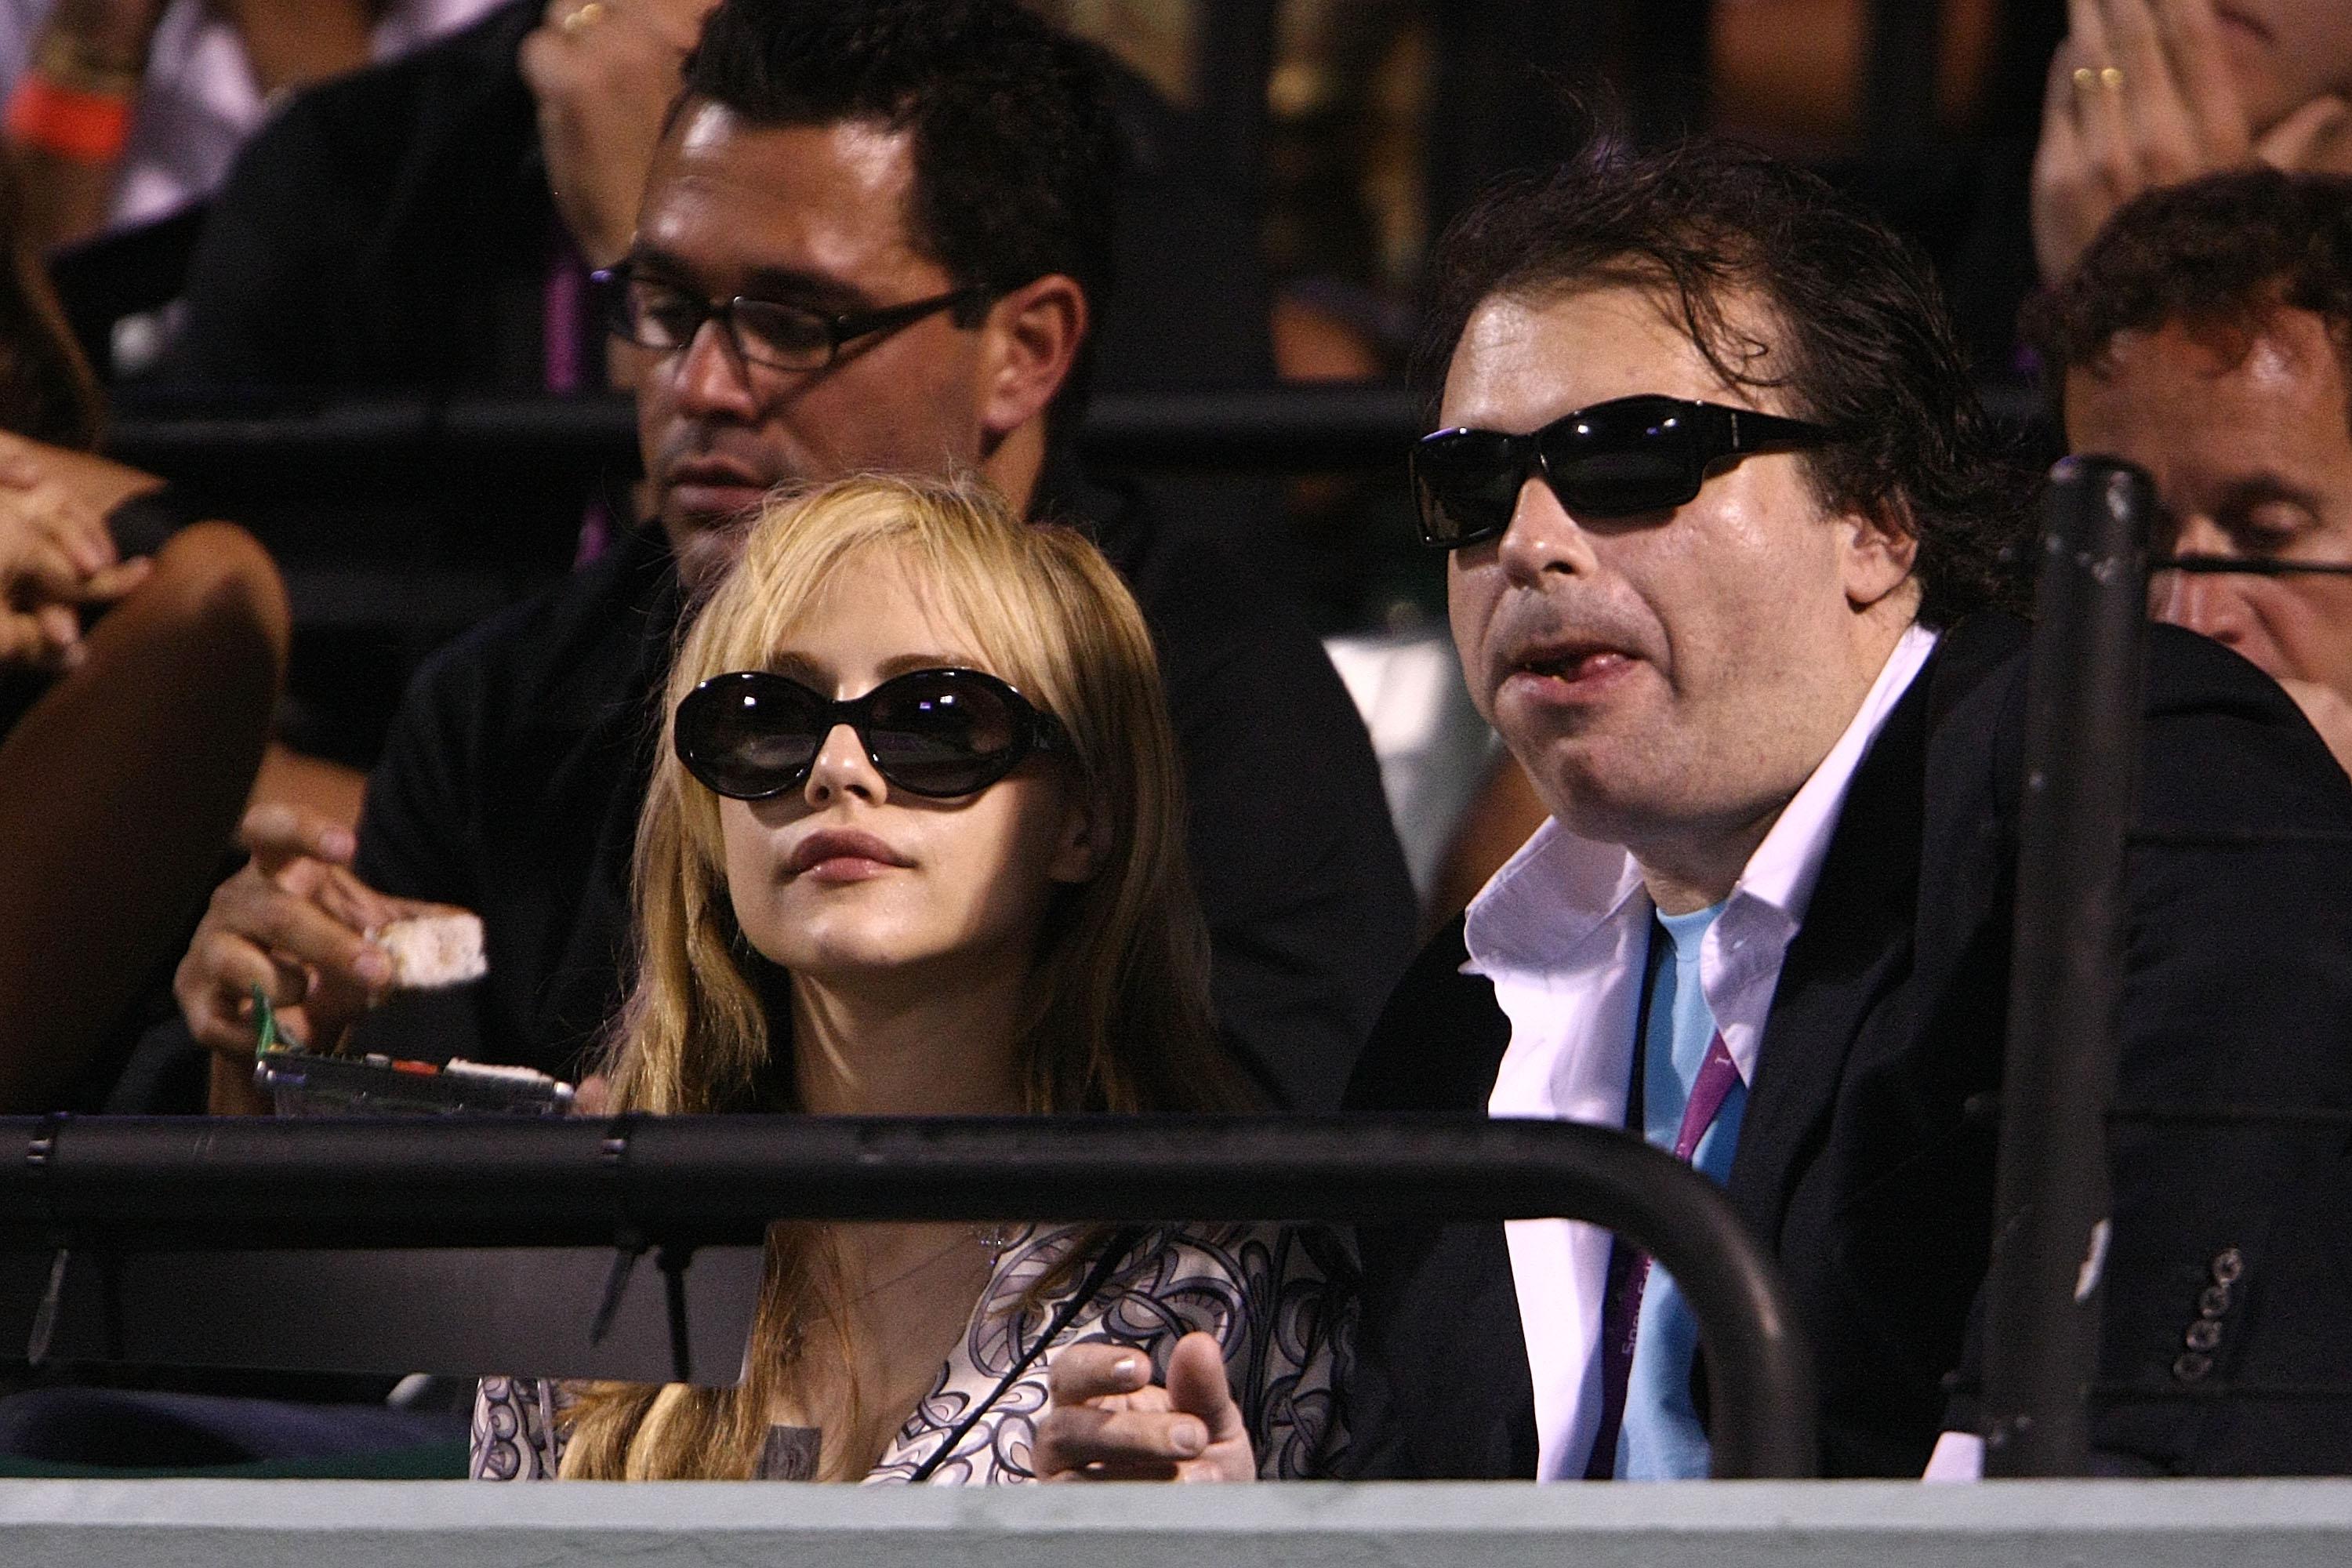 A woman, left, wears black sunglasses and a pink shirt. She is seated with a man, right, in a black jacket, pink button down shirt, and blue t-shirt; he also wears sunglasses. They are looking out onto a tennis court off-camera.